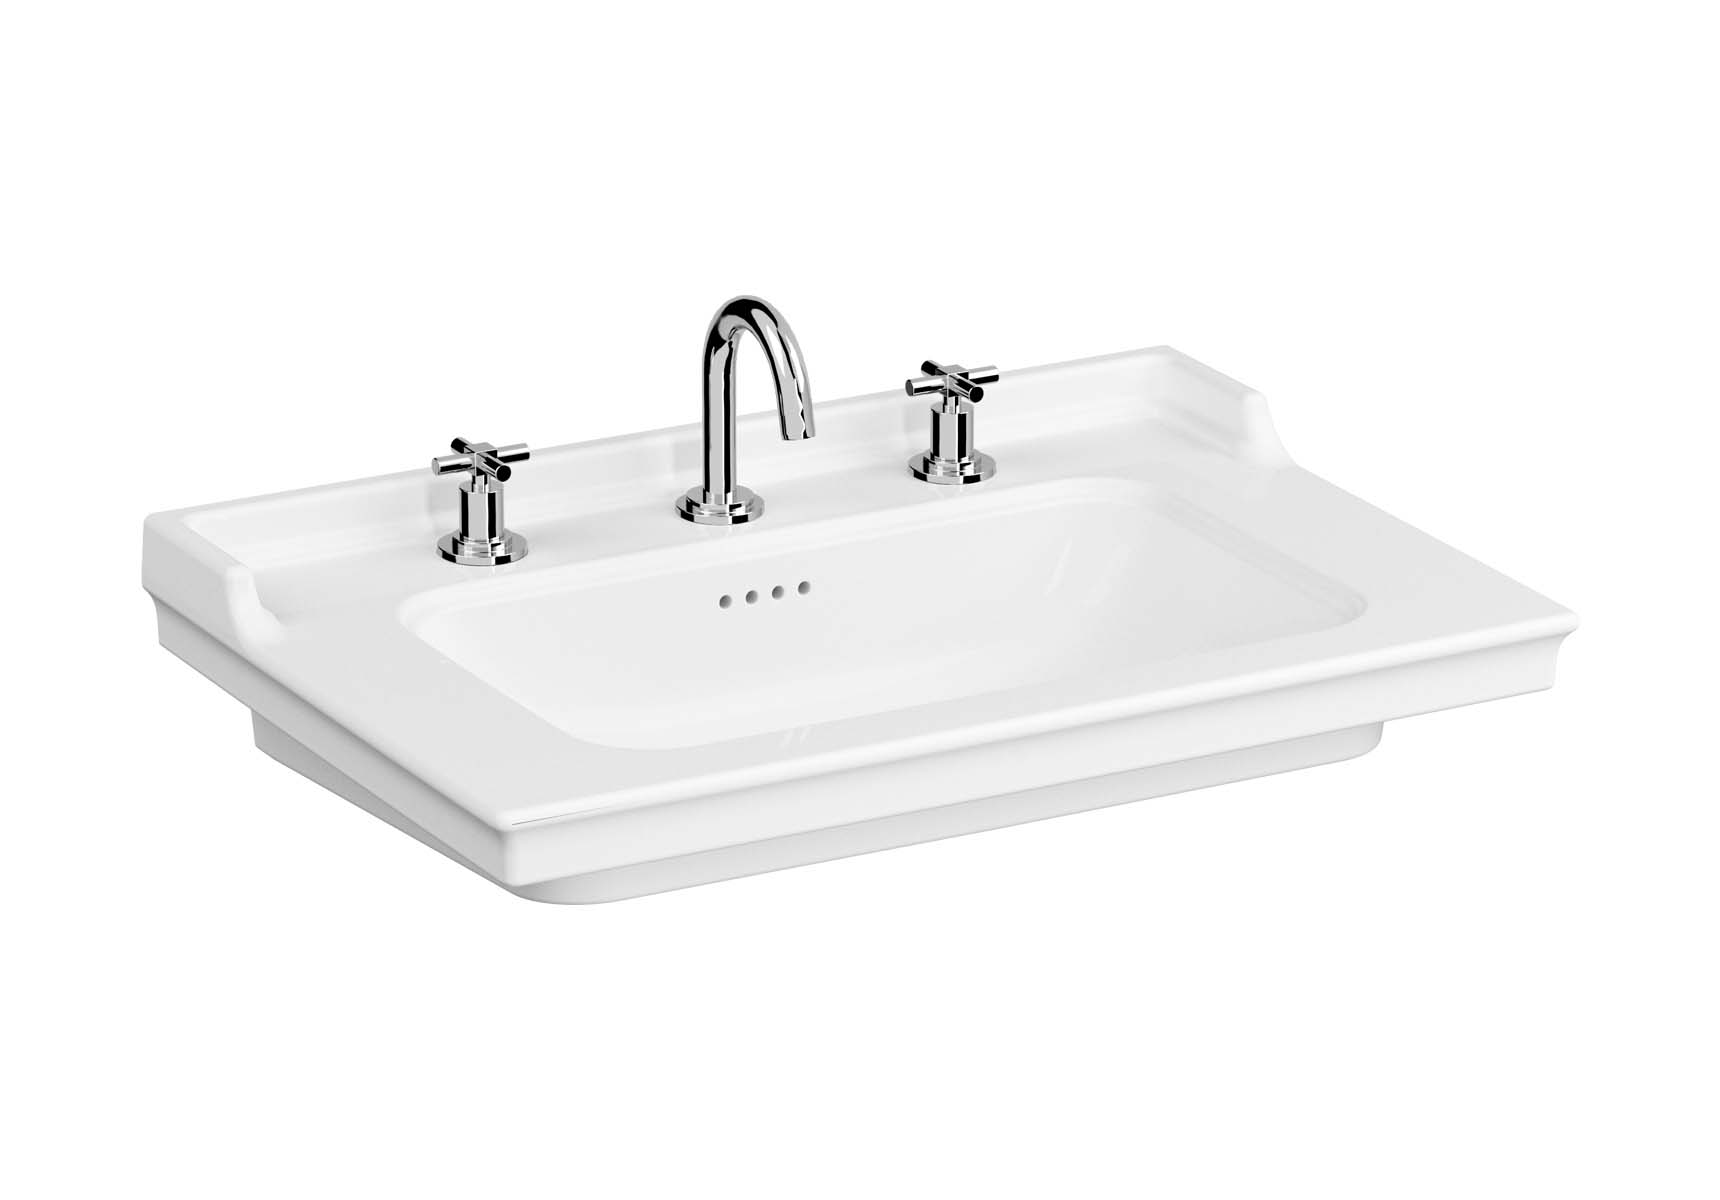 Vanity Basin, 80 cm, Three Tap Holes, With Overflow Hole, With Metallic Legs